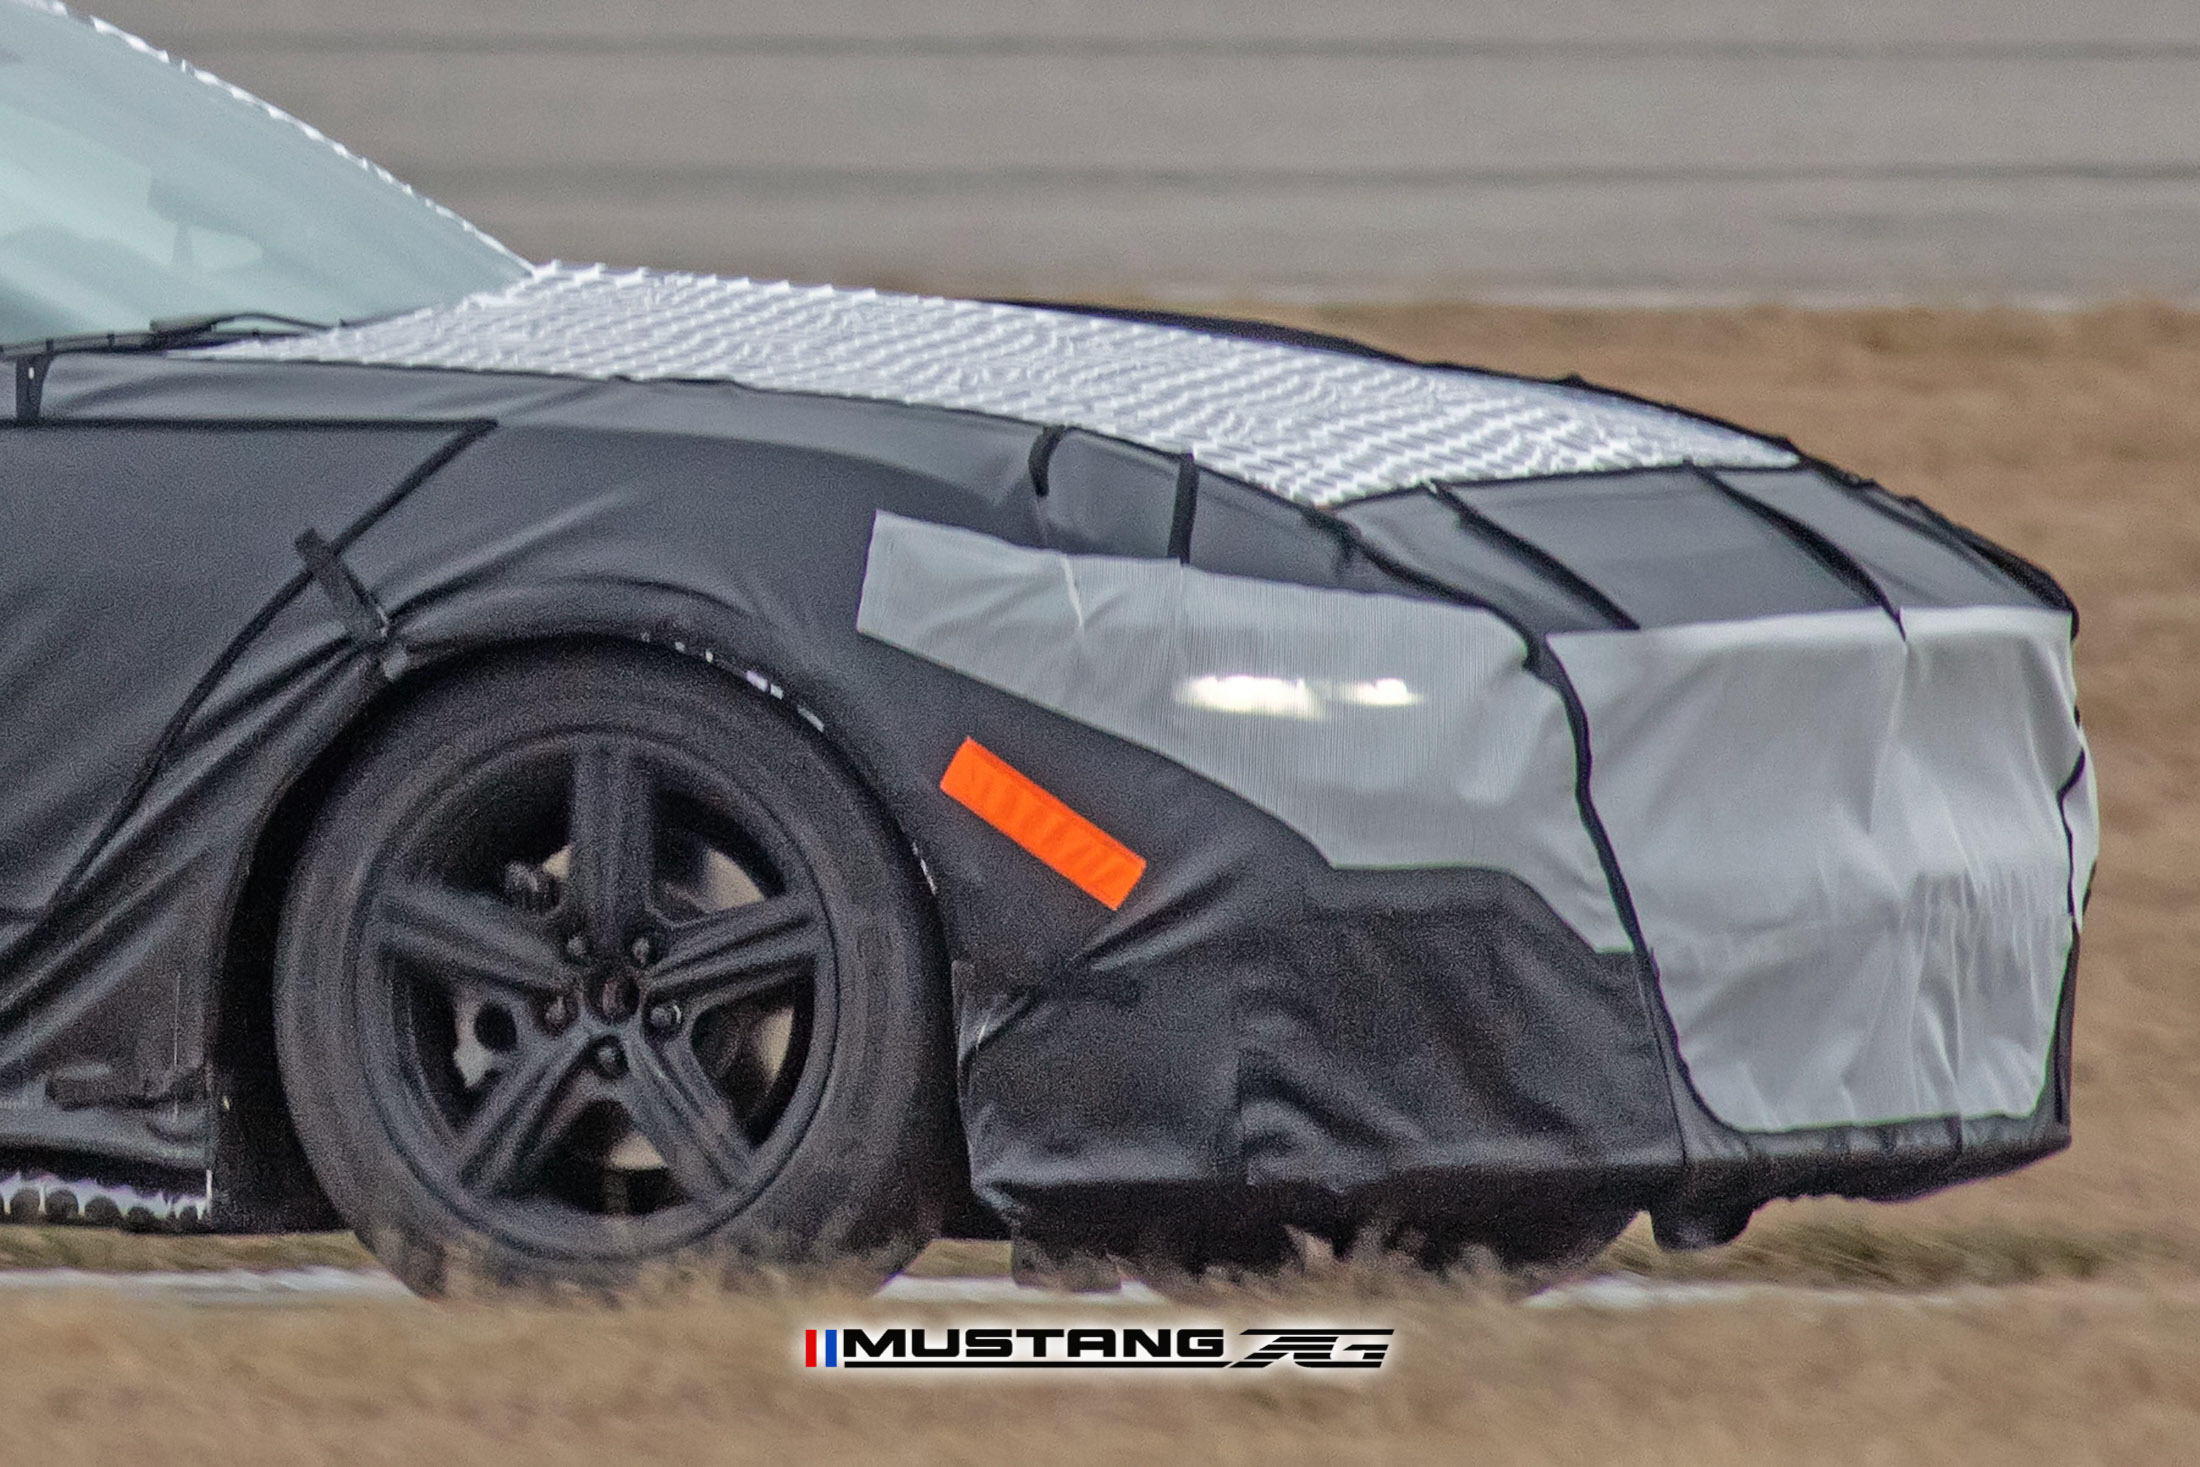 S650 Mustang First Look: S650 Mustang Prototype Spied With Production Body! 📸 1642203392864